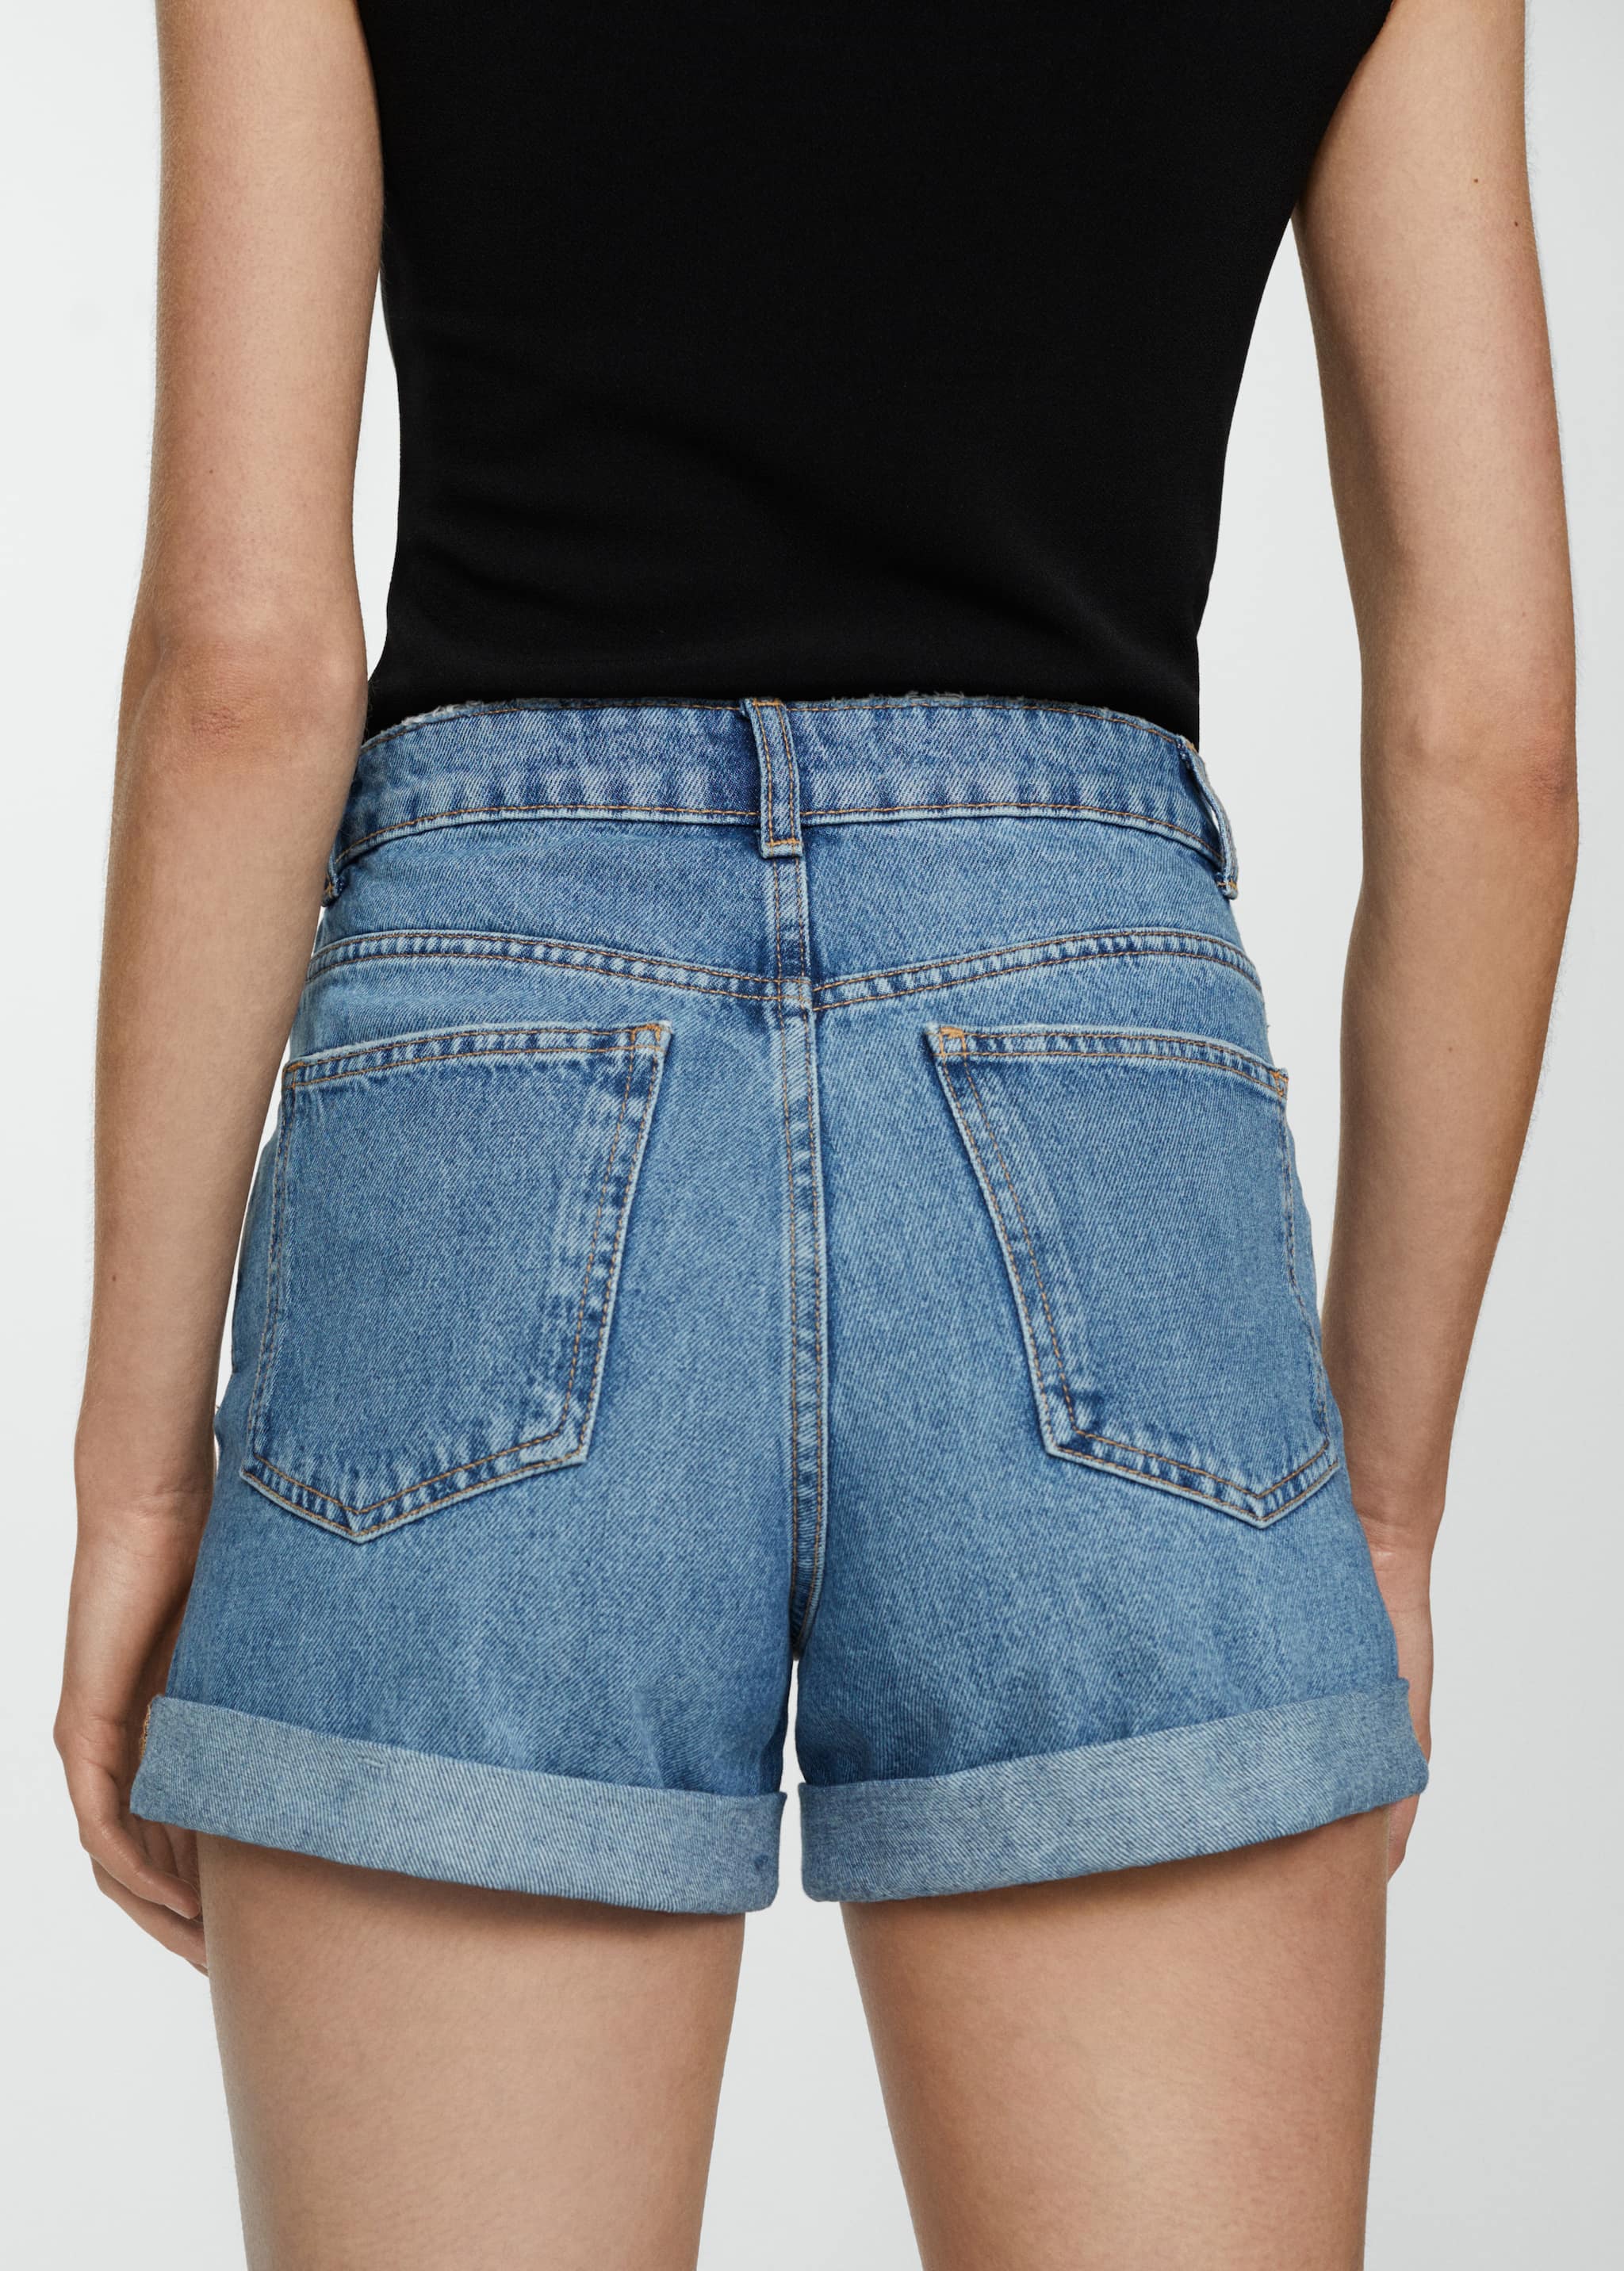 Mom-fit denim shorts - Details of the article 6